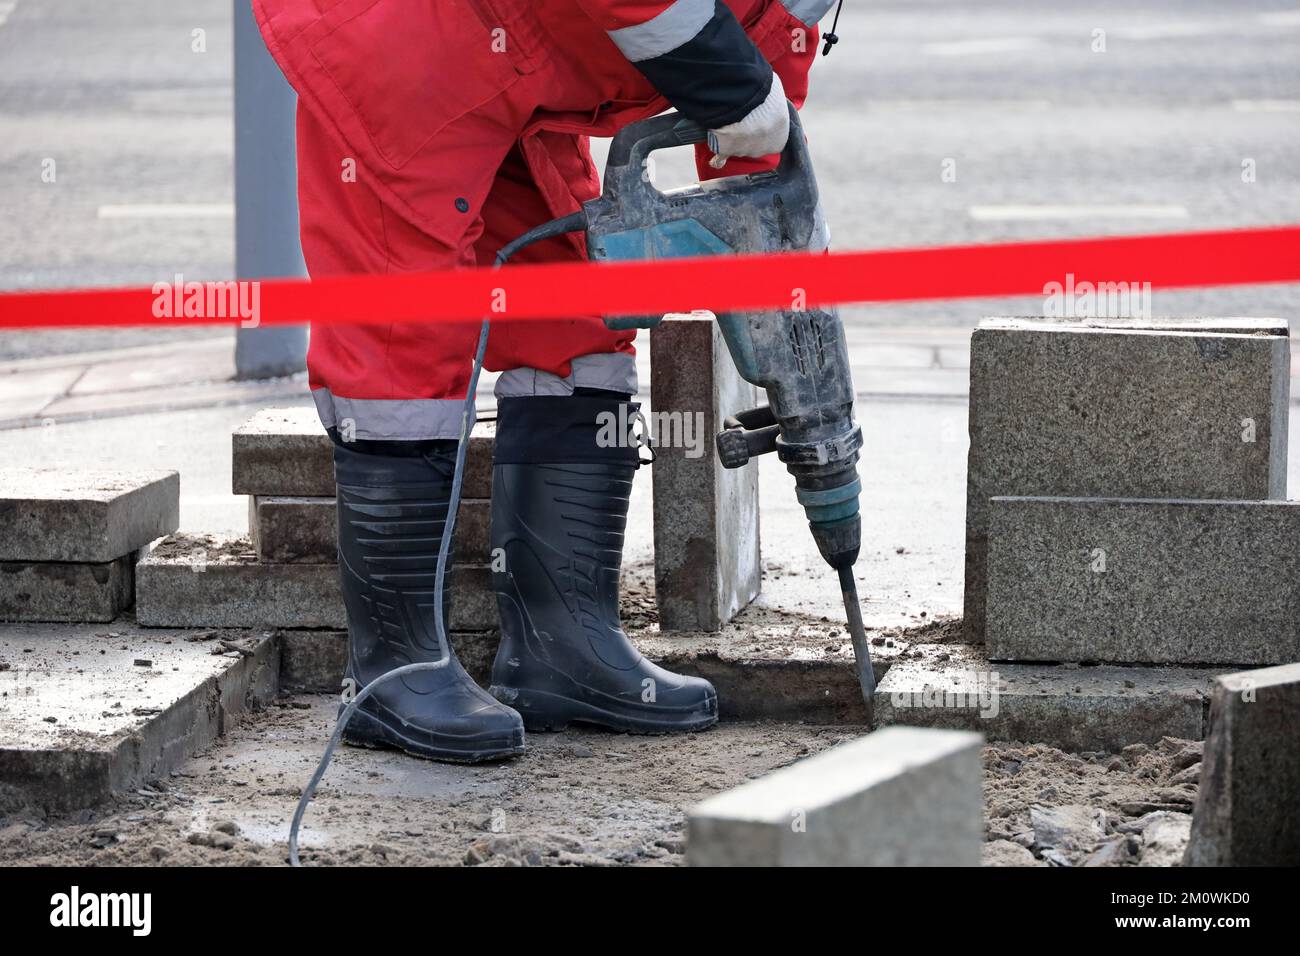 Worker repair the road surface with a jackhammer. Construction work, laying of paving slabs in city Stock Photo